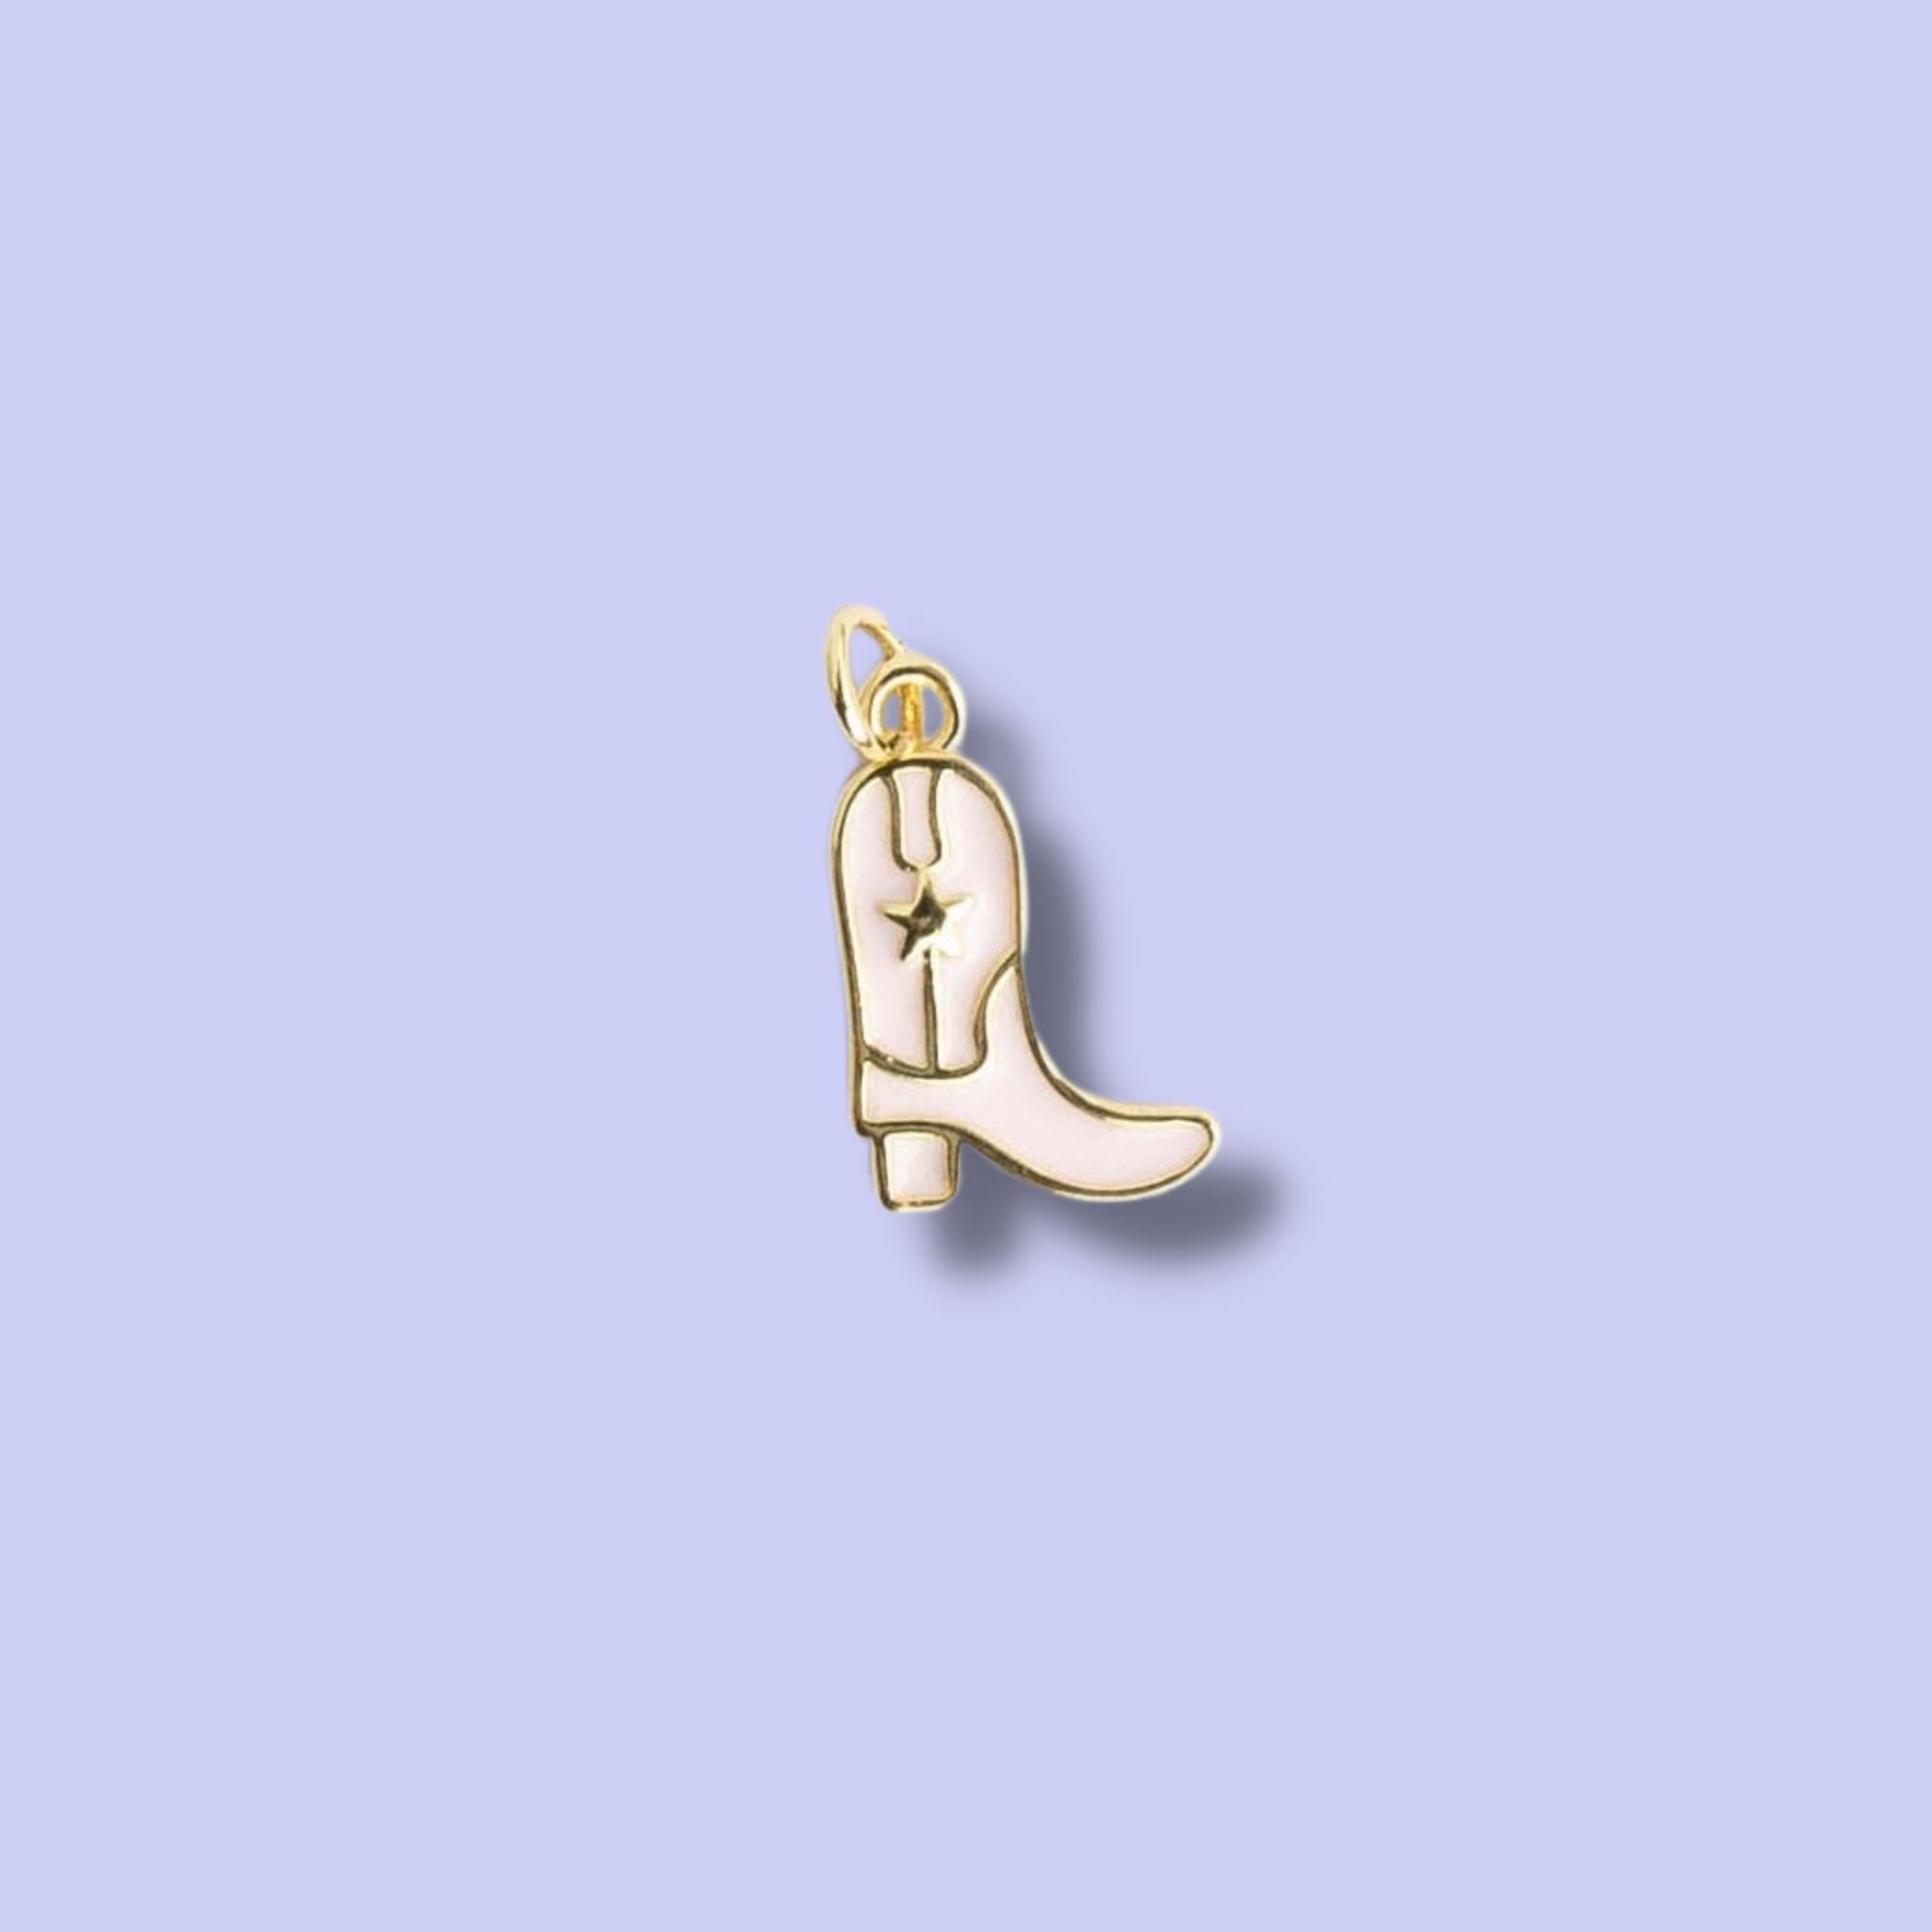 Pink Cowboy Boot Charm - 24K Gold Filled